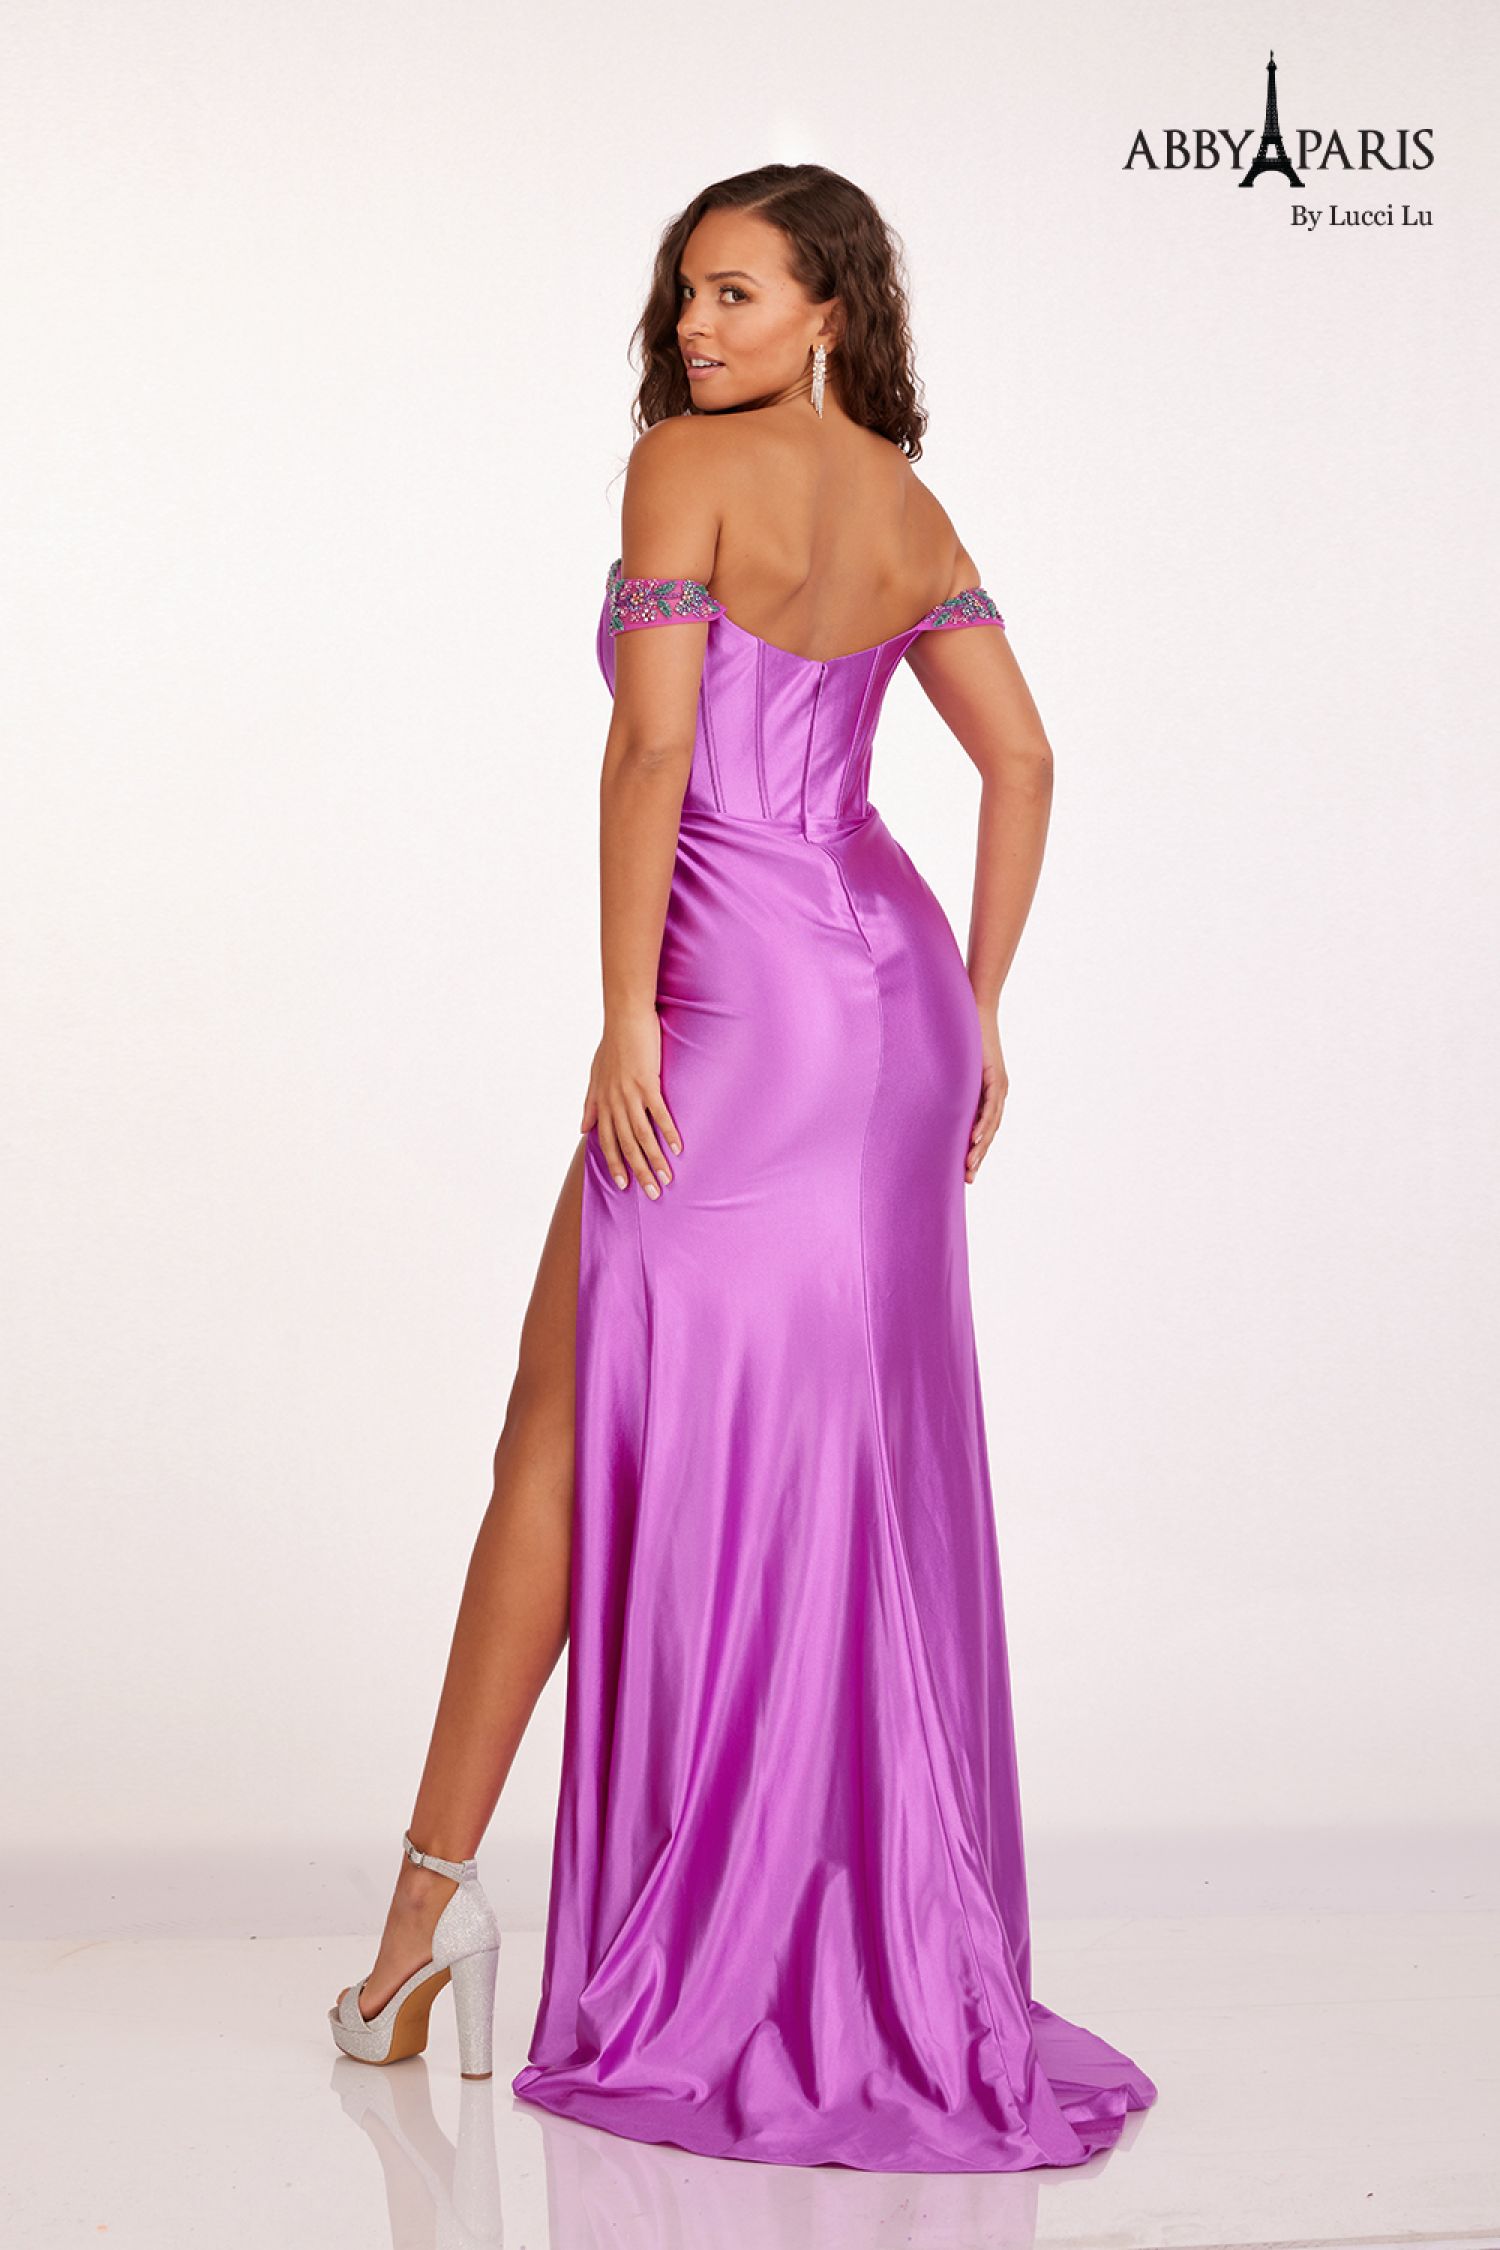 Discover the perfect blend of elegance and style with our Abby Paris 90206 Prom Dress. Crafted with luxurious satin and intricate beading, this dress is designed to accentuate your figure and make you stand out at any formal event. The stunning off-the-shoulder neckline and corset back add a touch of sophistication, while the maxi slit adds a modern twist. Embrace your inner fashion icon with this statement piece.  Sizes: 0-16  Colors: Emerald, Red, Violet